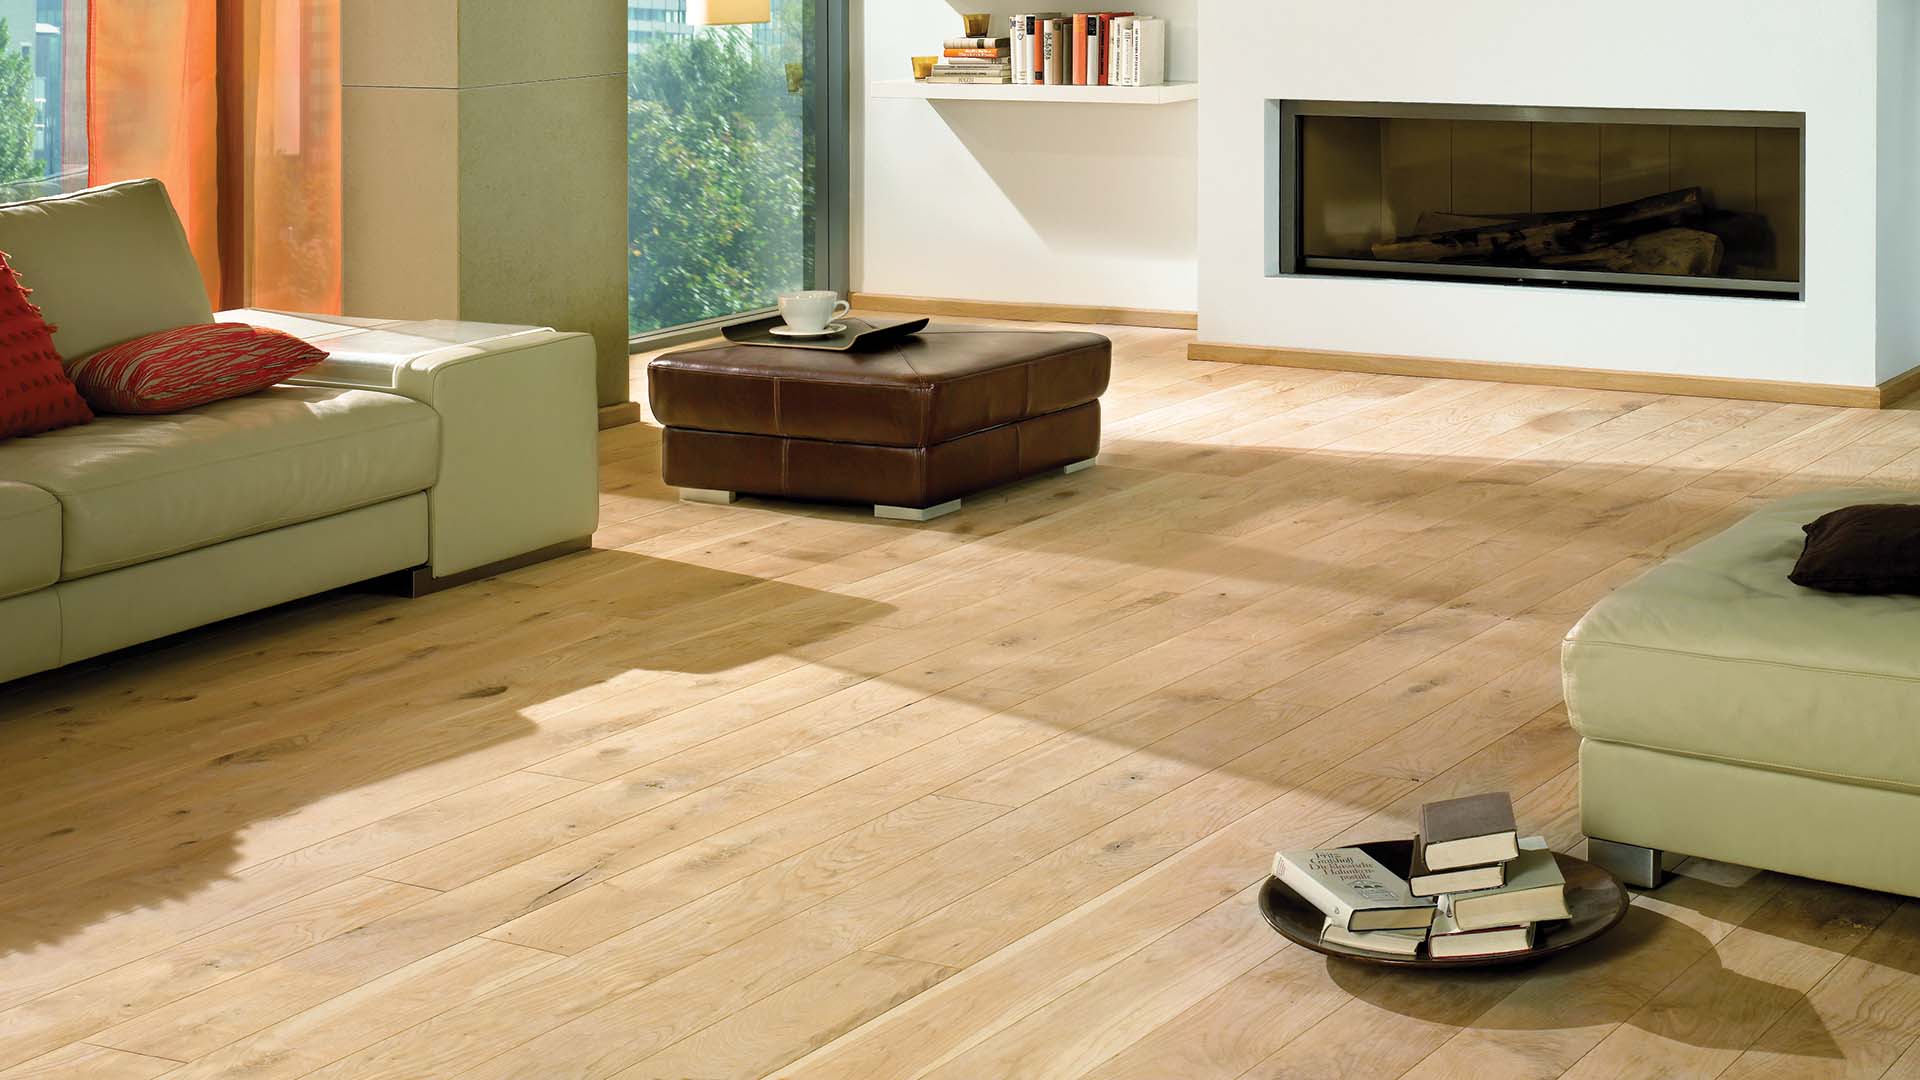 So what’s the best way to keep your wood floors looking like the day they were installed?